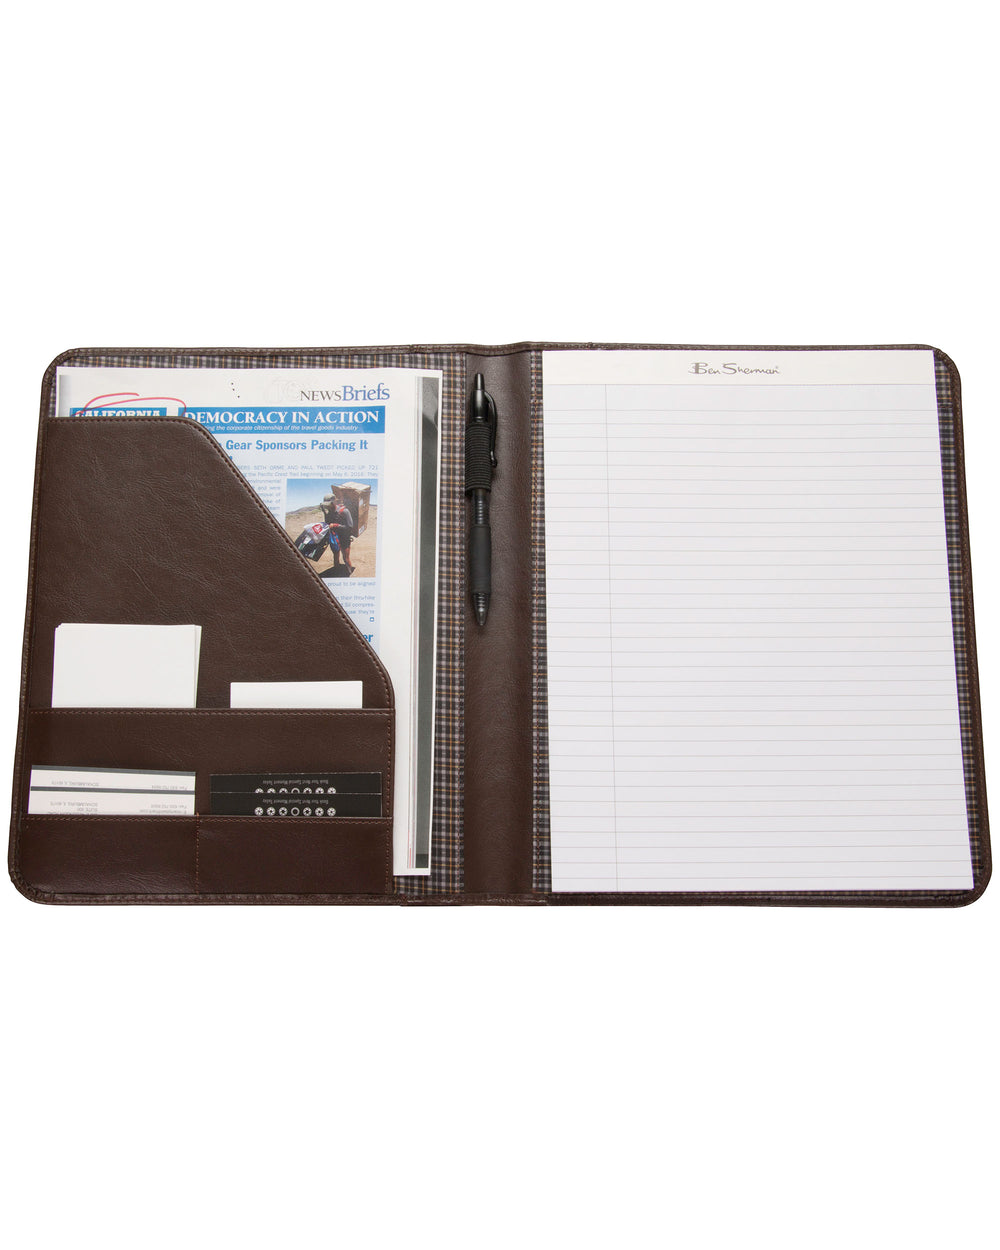 Pebbled Vegan-Leather Open-Style Classic-Size Bifold Writing Pad - Brown